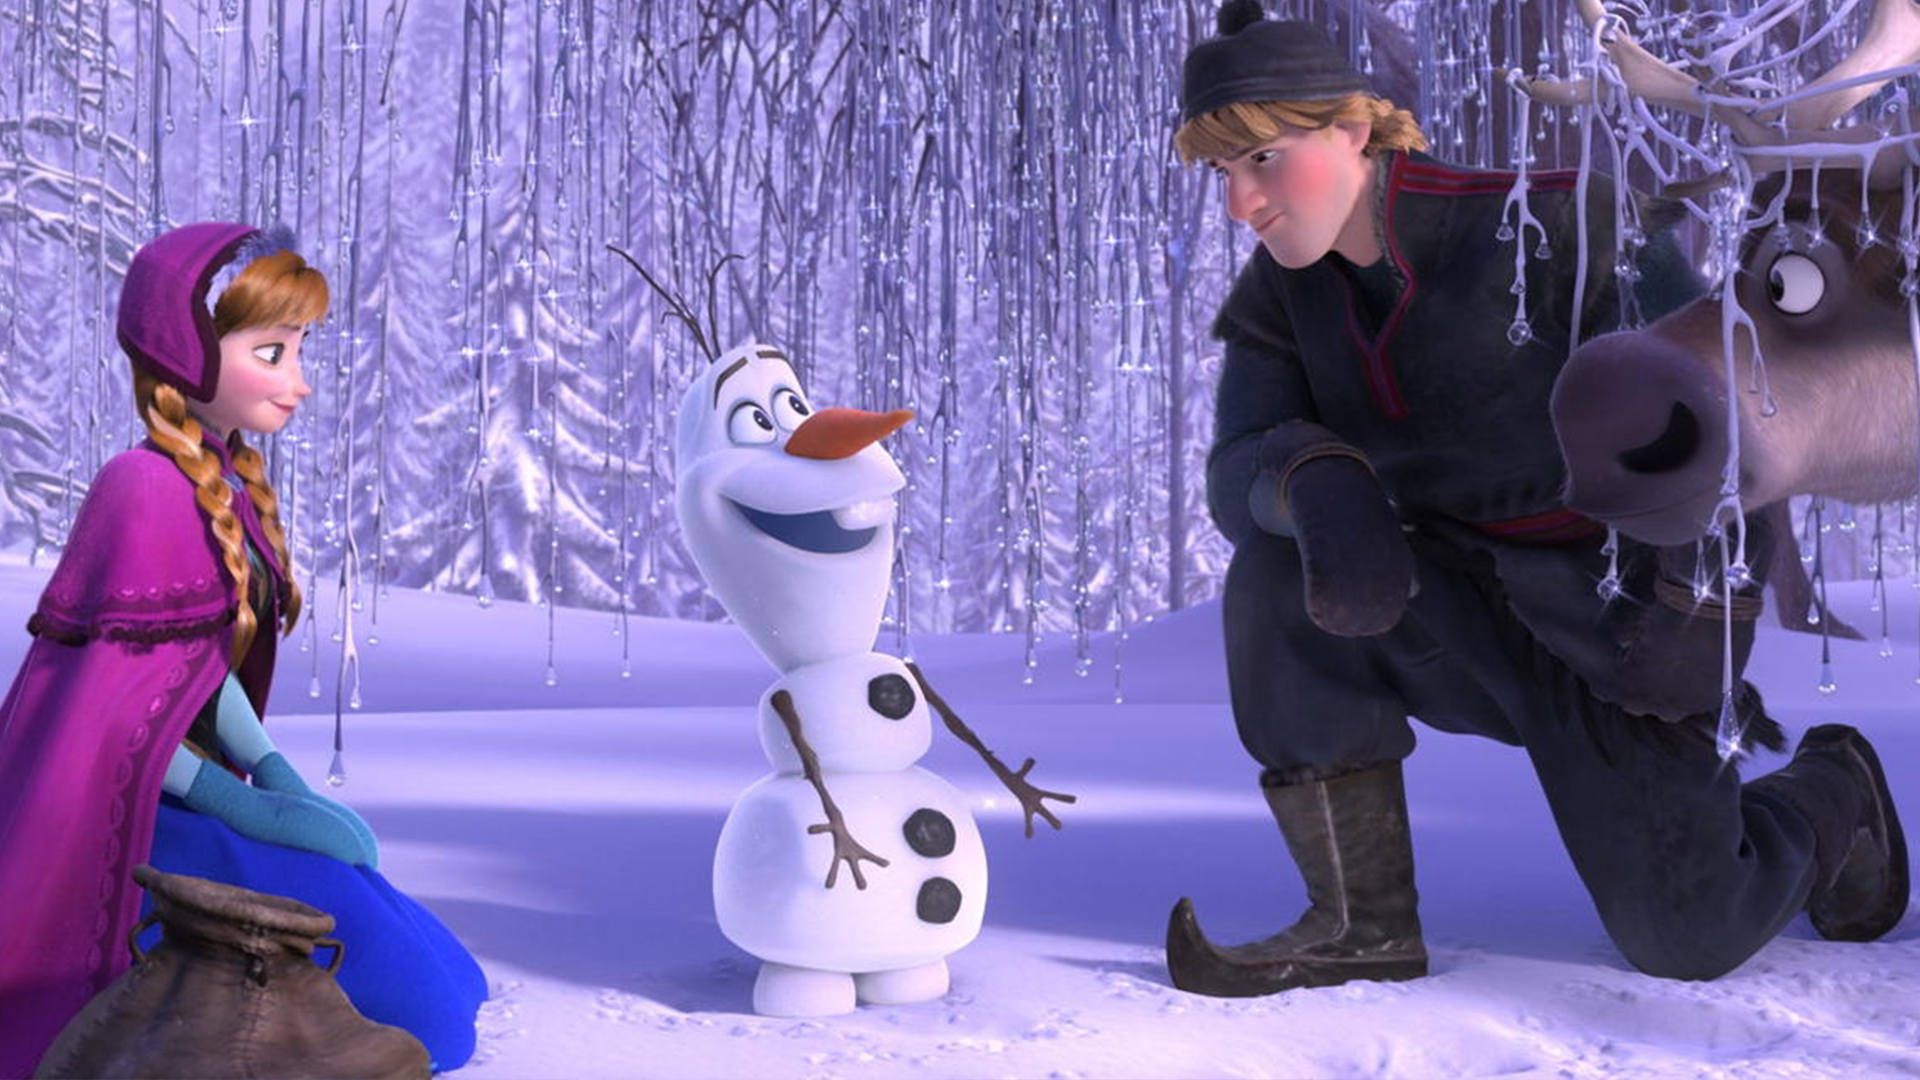 5 'Frozen' Facts You Never Knew